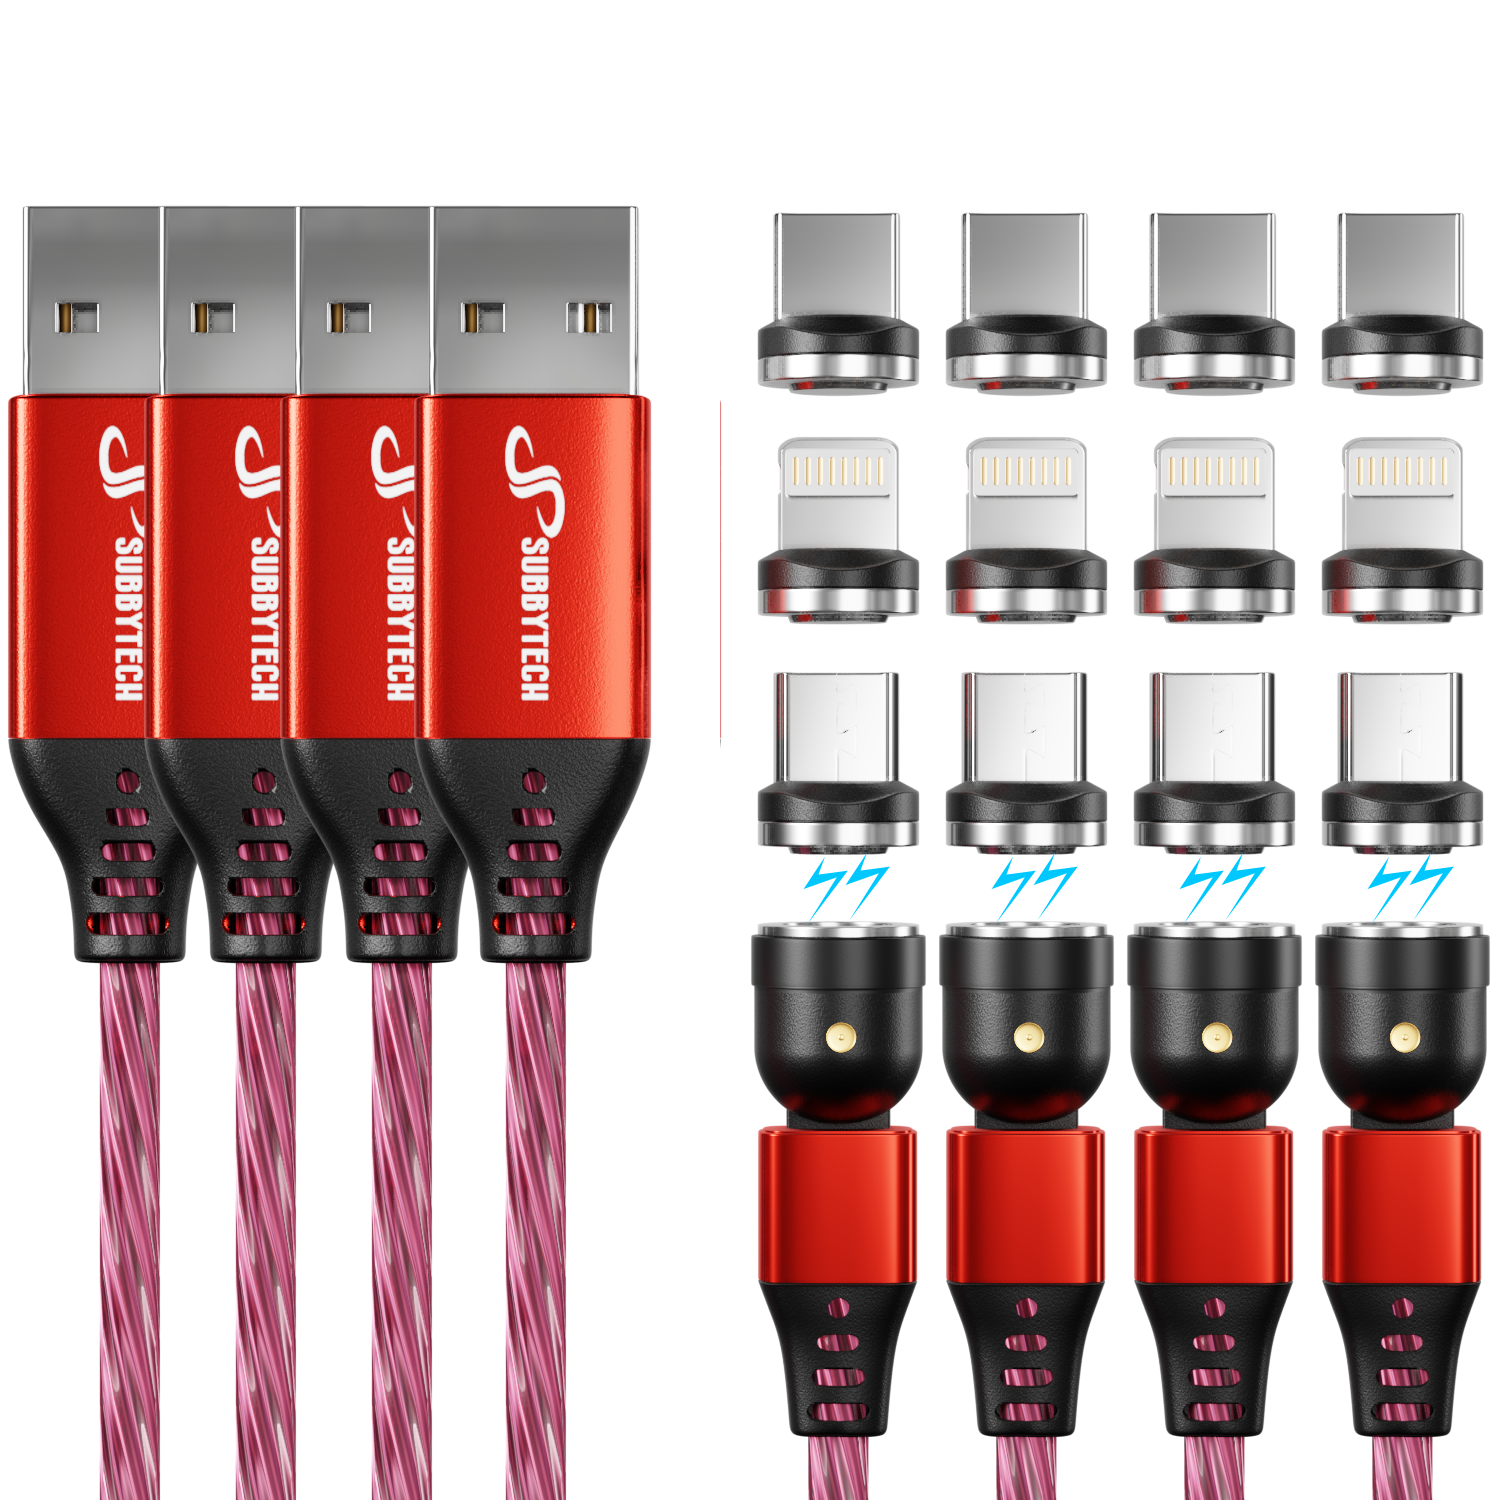 CliX Light up charging cables